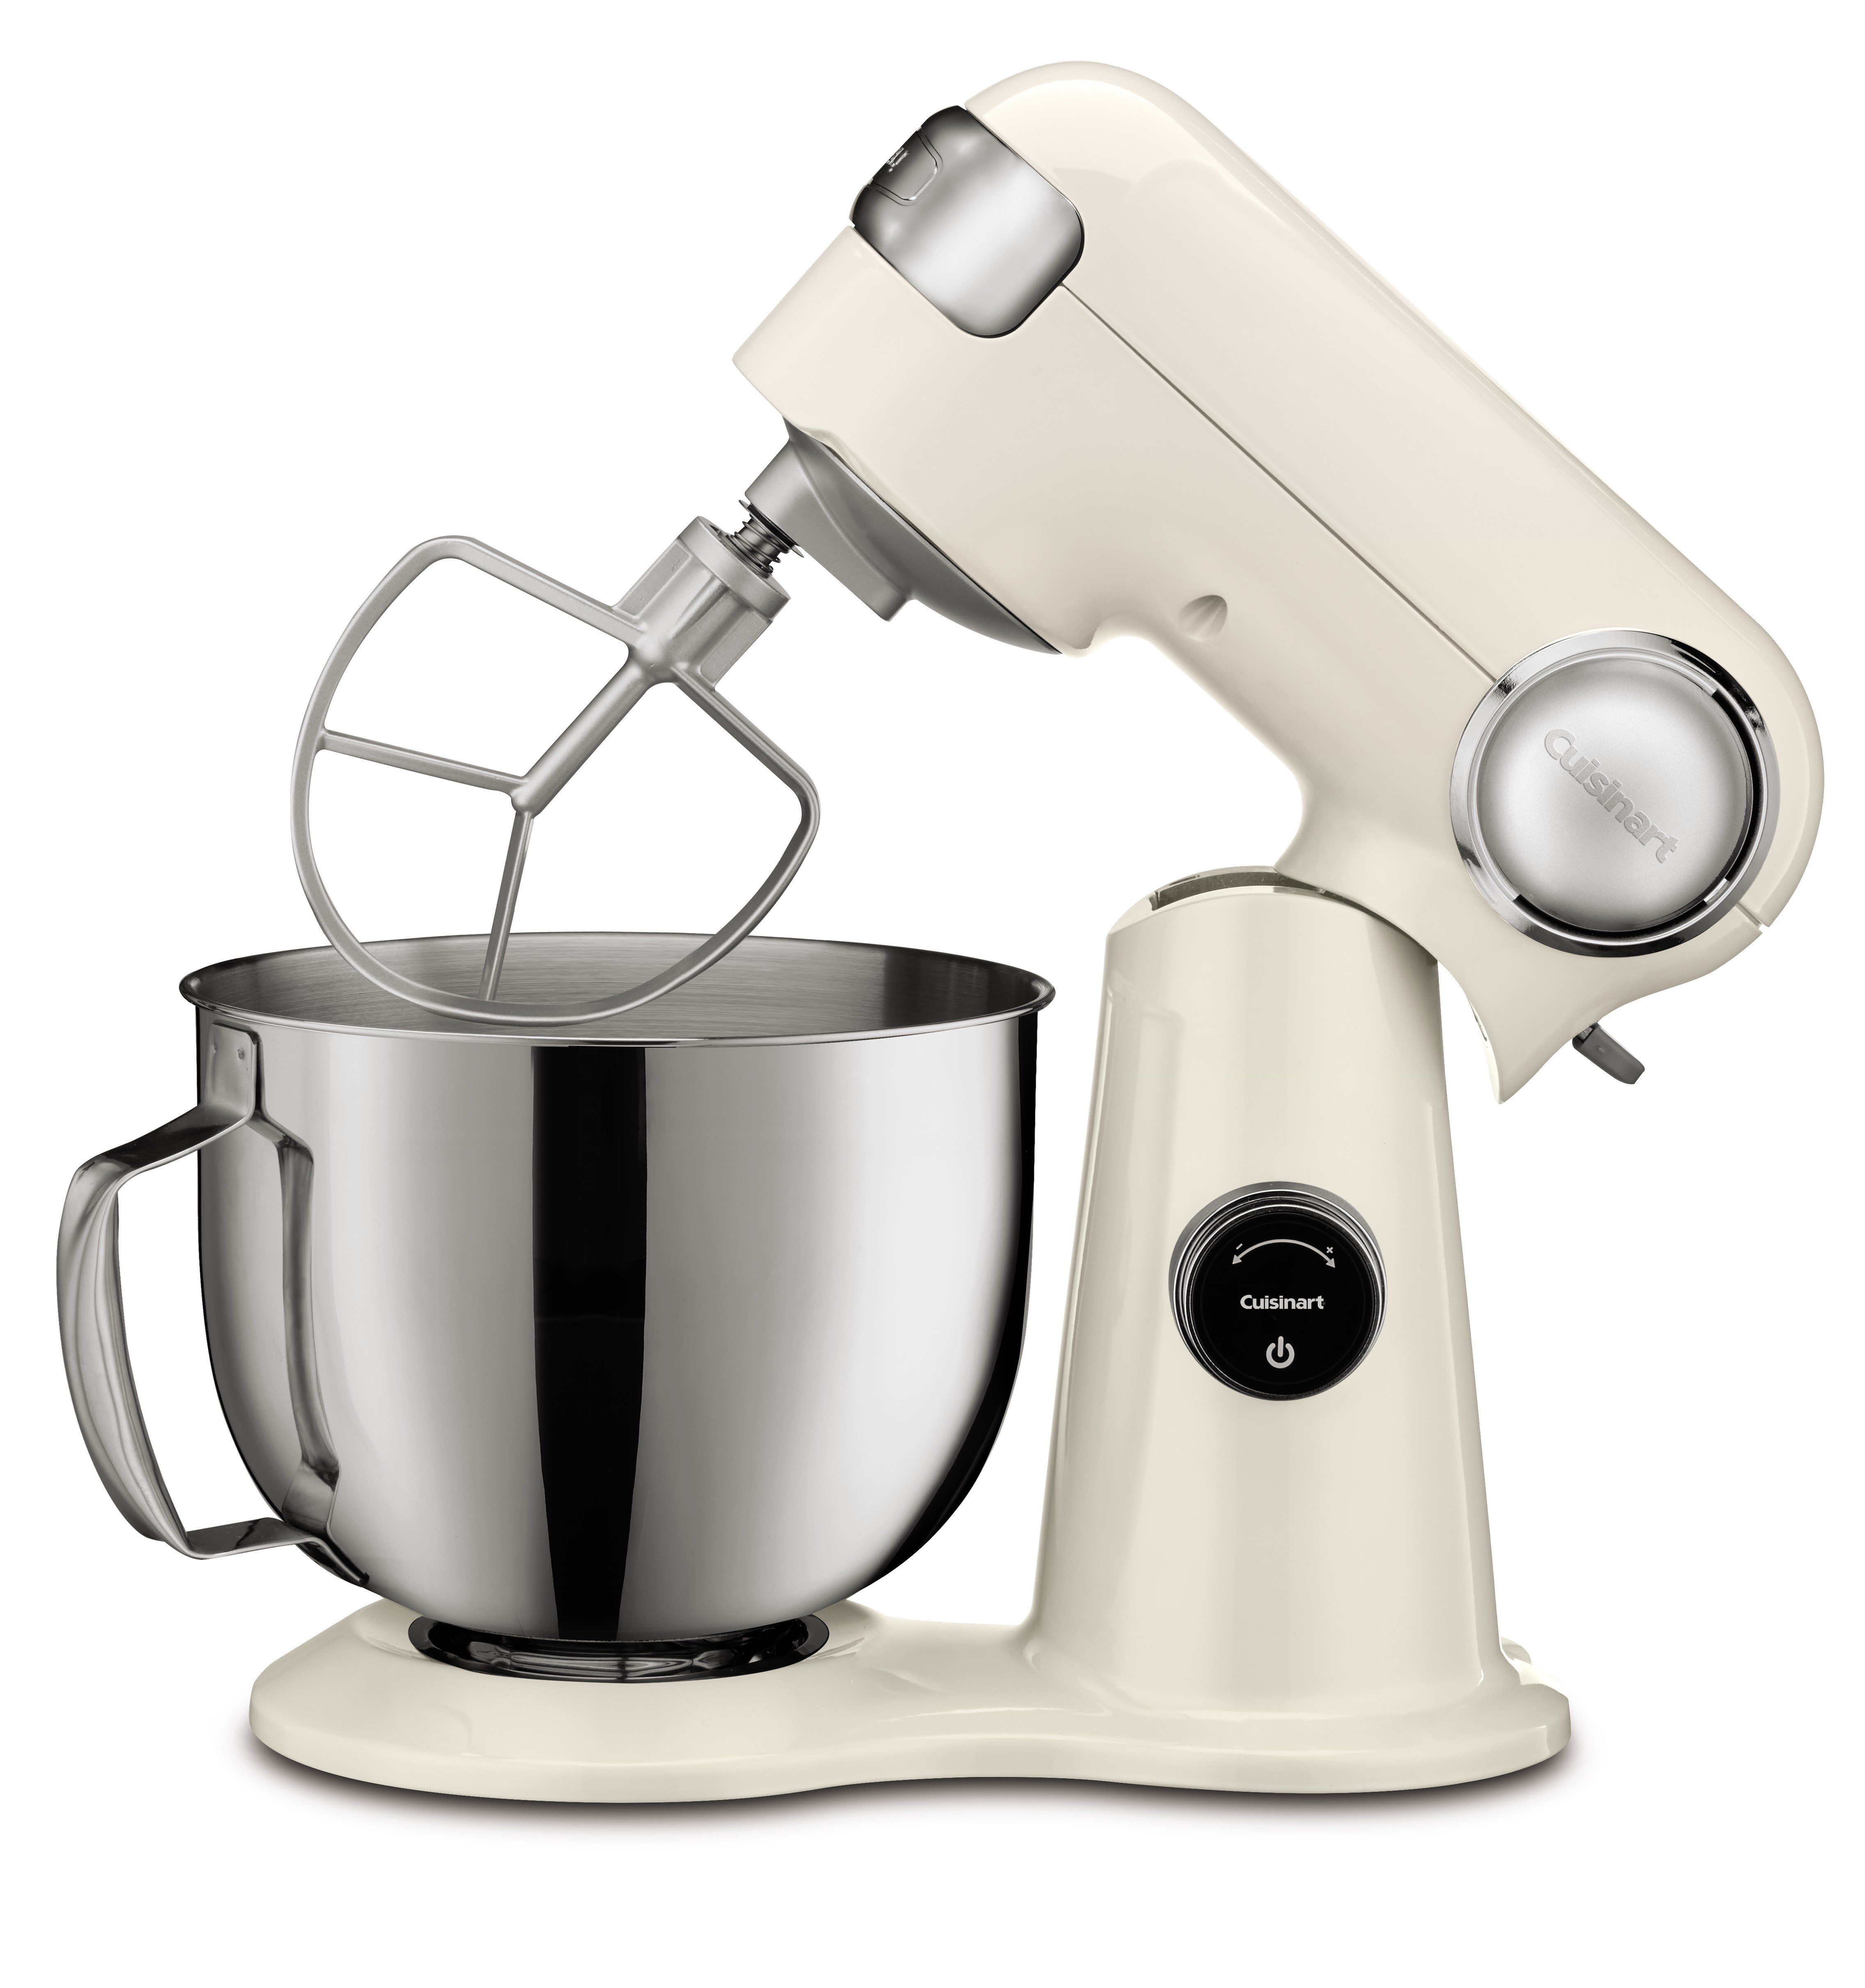 The 9 Best Stand Mixers, According to Our Tests